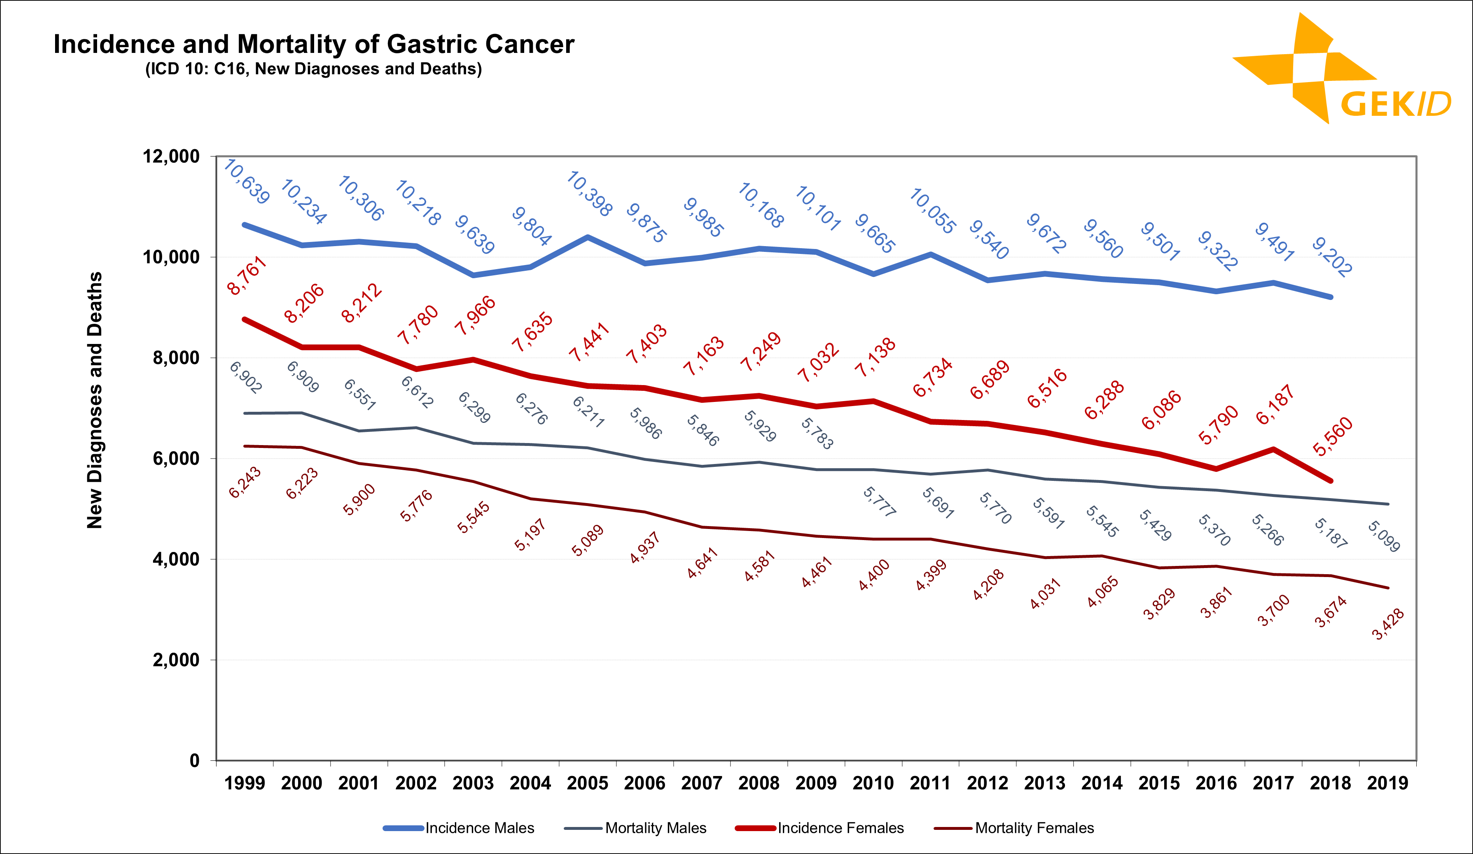 Estimated incidence of gastric cancer (ICD 10: C16) in Germany - number of cases 1.